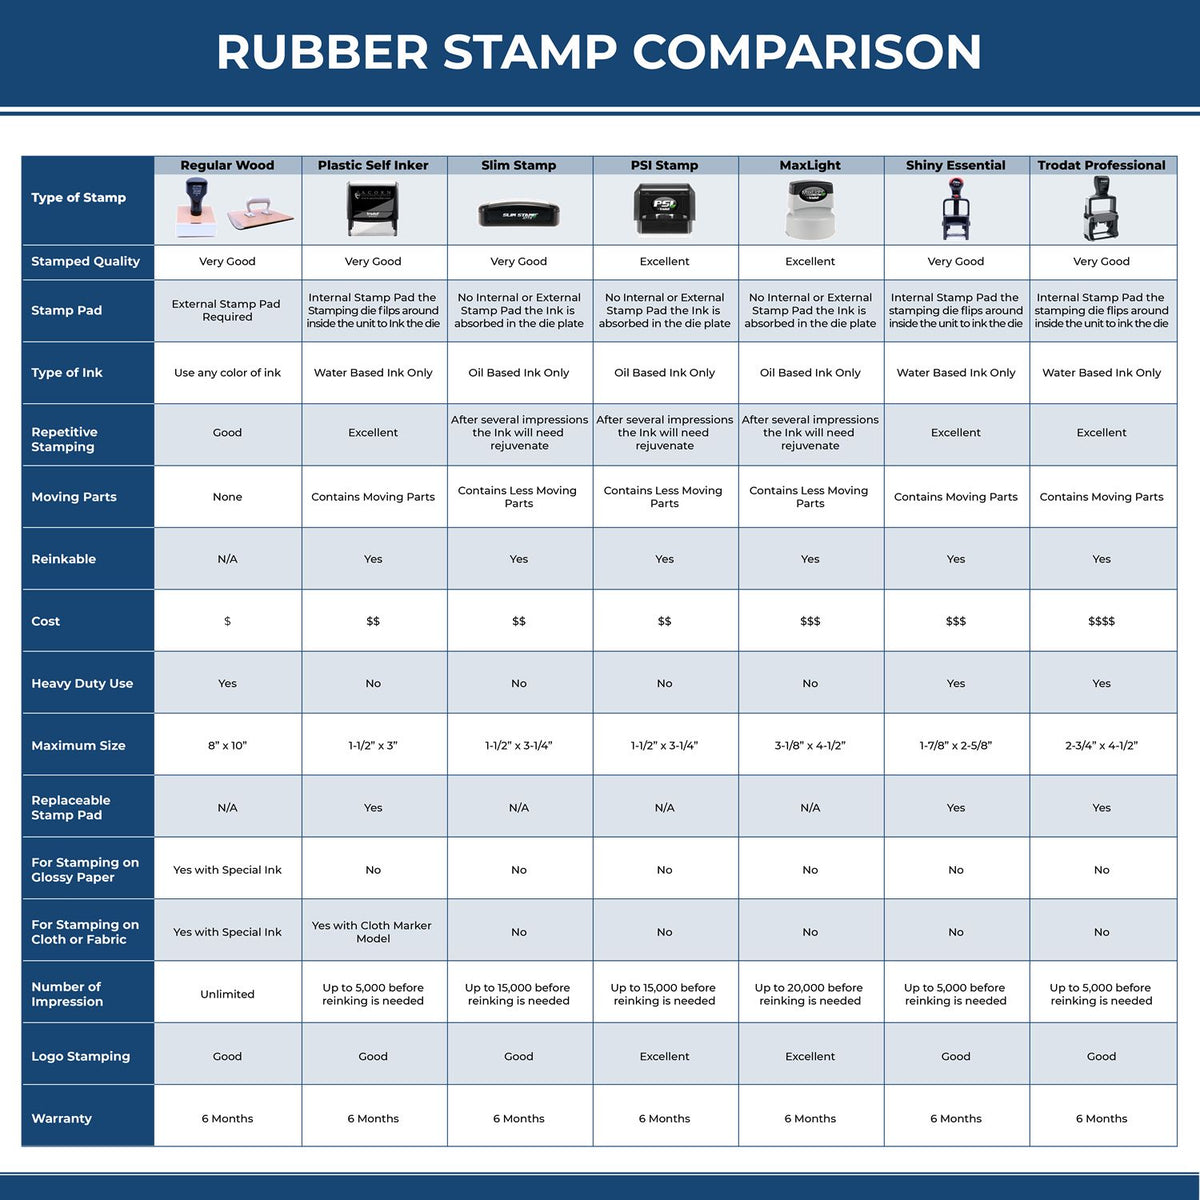 A comparison chart for the different types of mount models available for the PSI Kansas Notary Stamp.